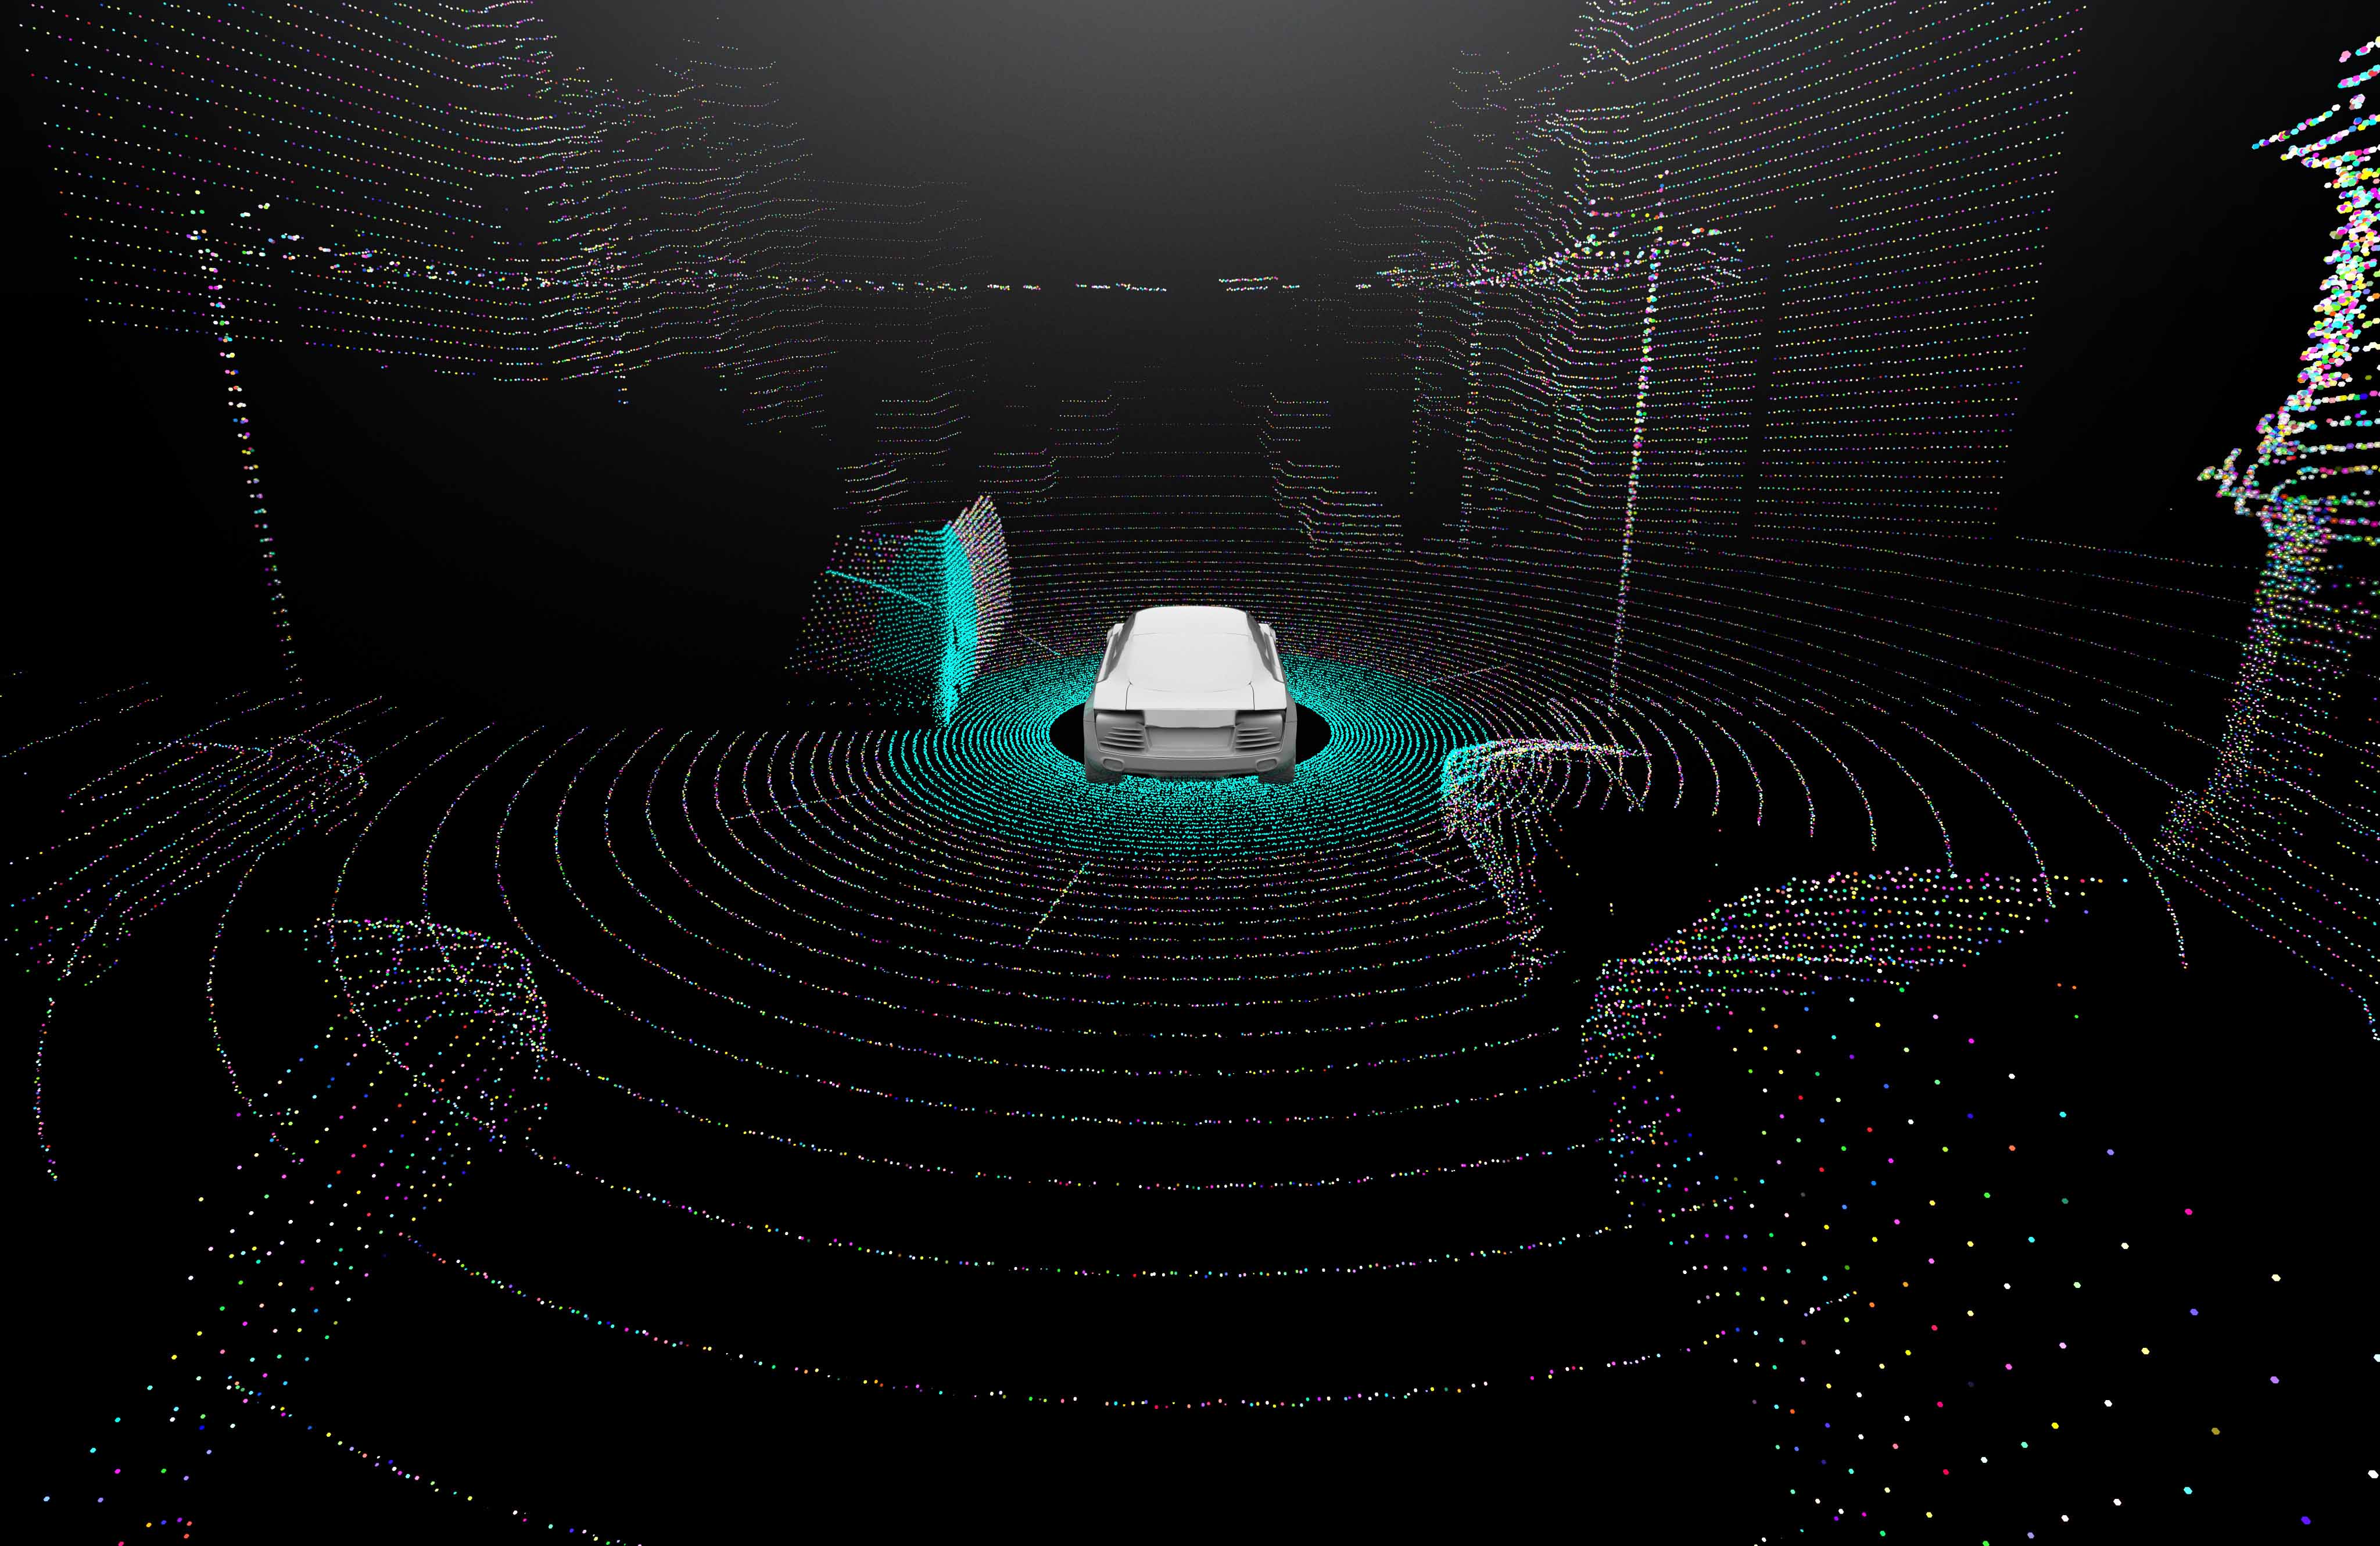 Why is lidar an important sensor for self-driving cars?